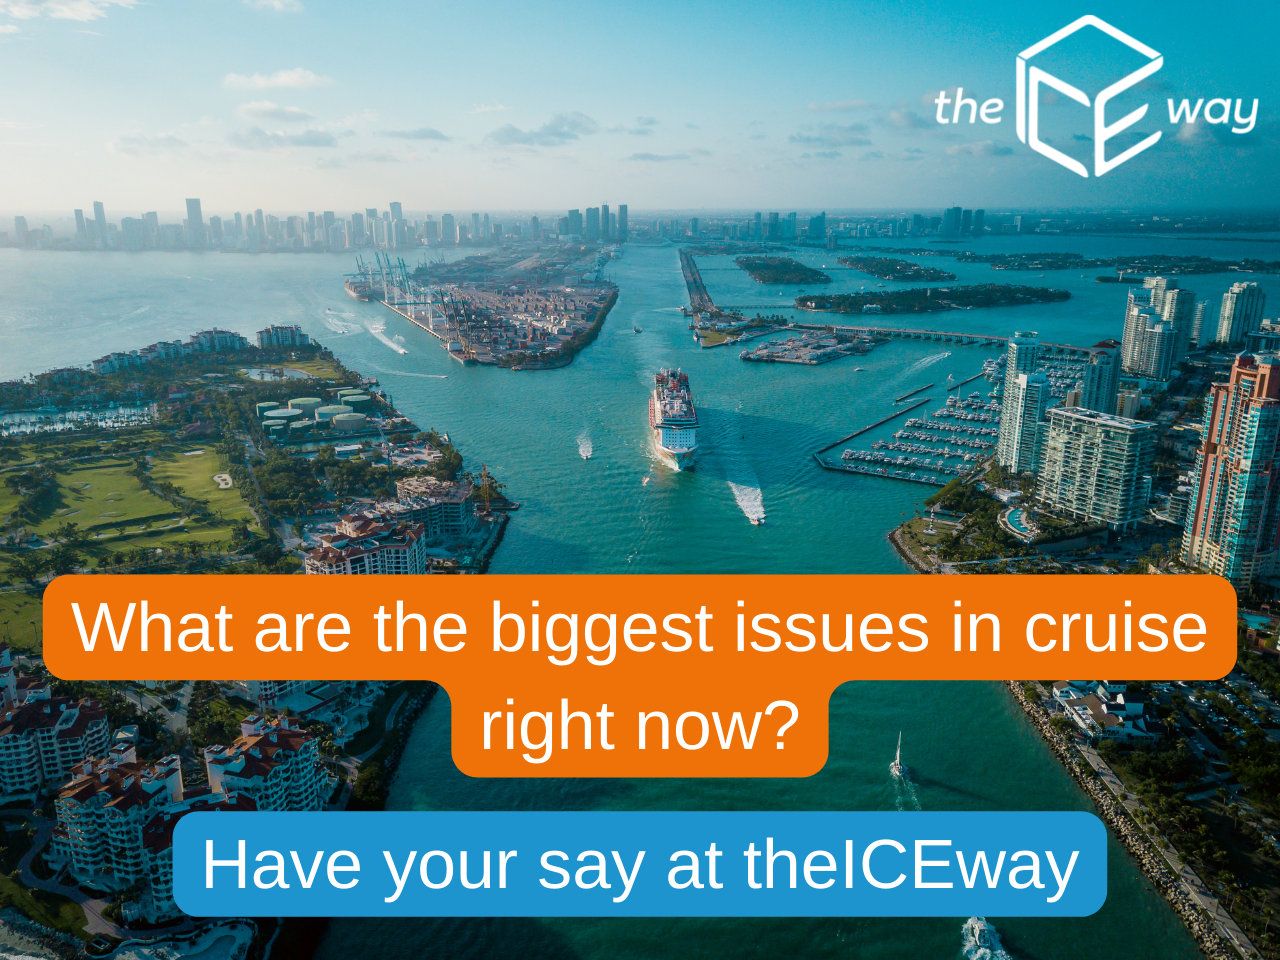 Have your say with theICEway (new for 2022)